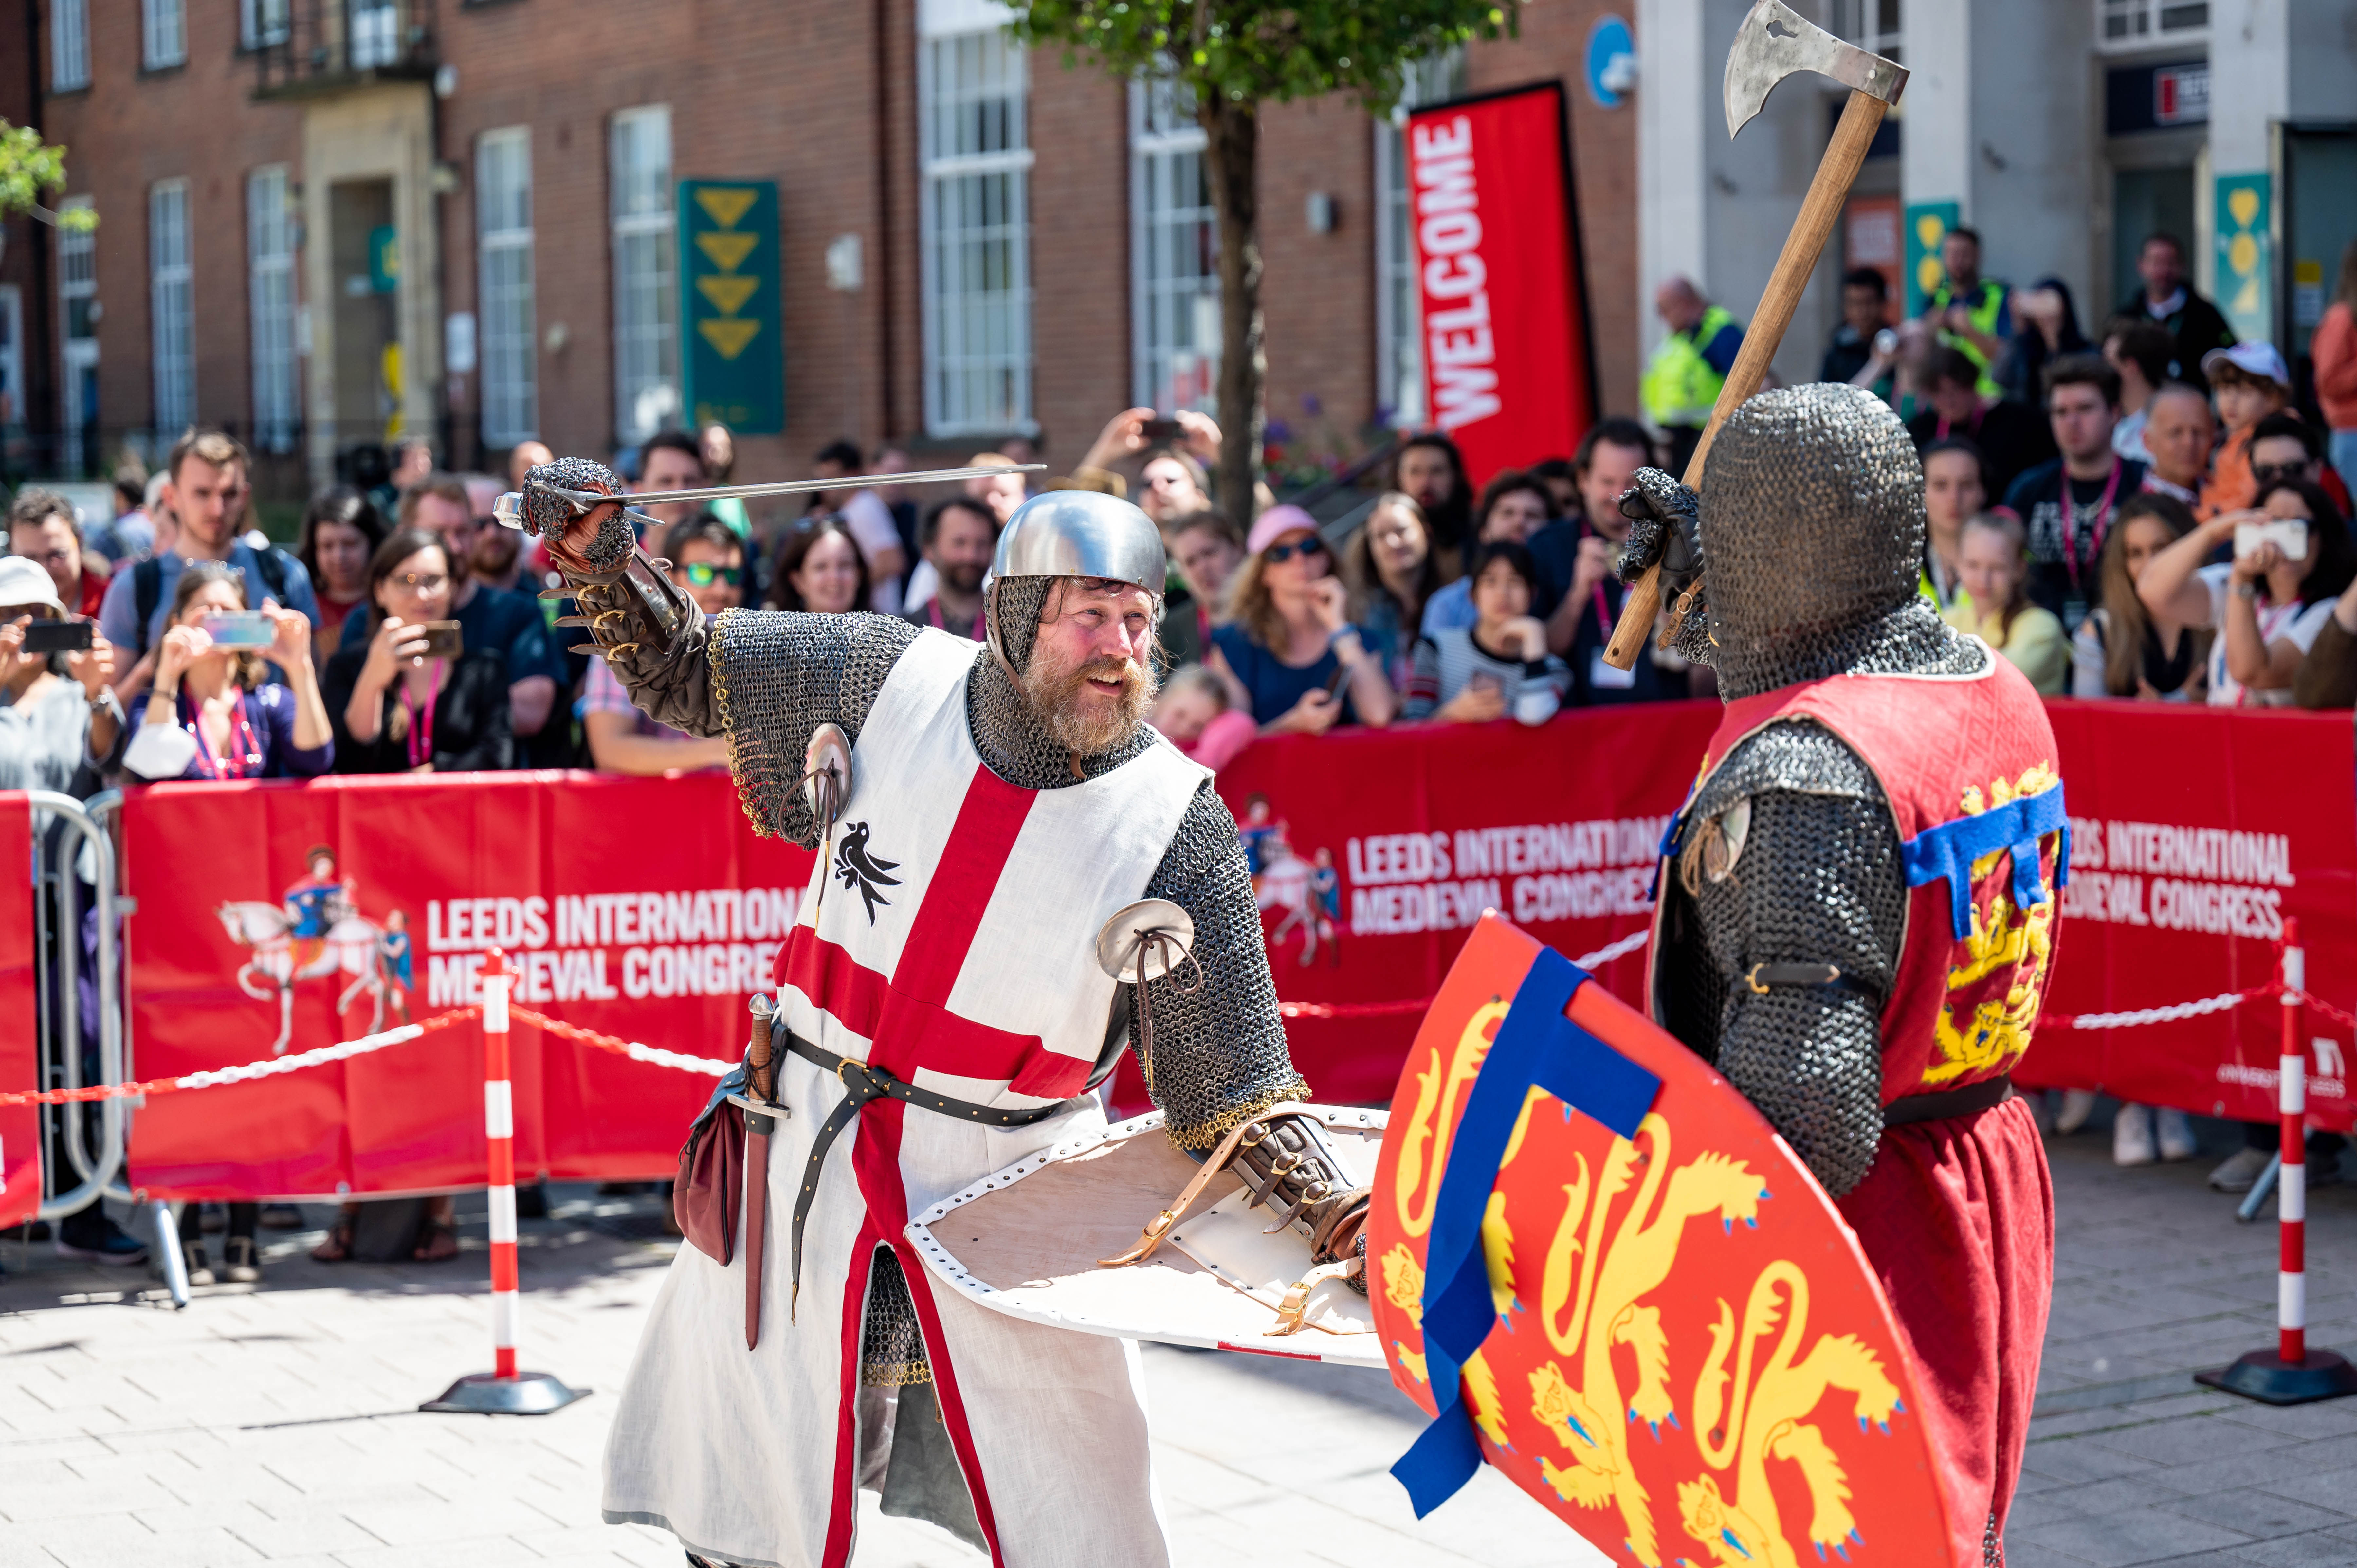 Sword combat demonstration in front of large crowds at IMC 2023 Making Leeds Medieval